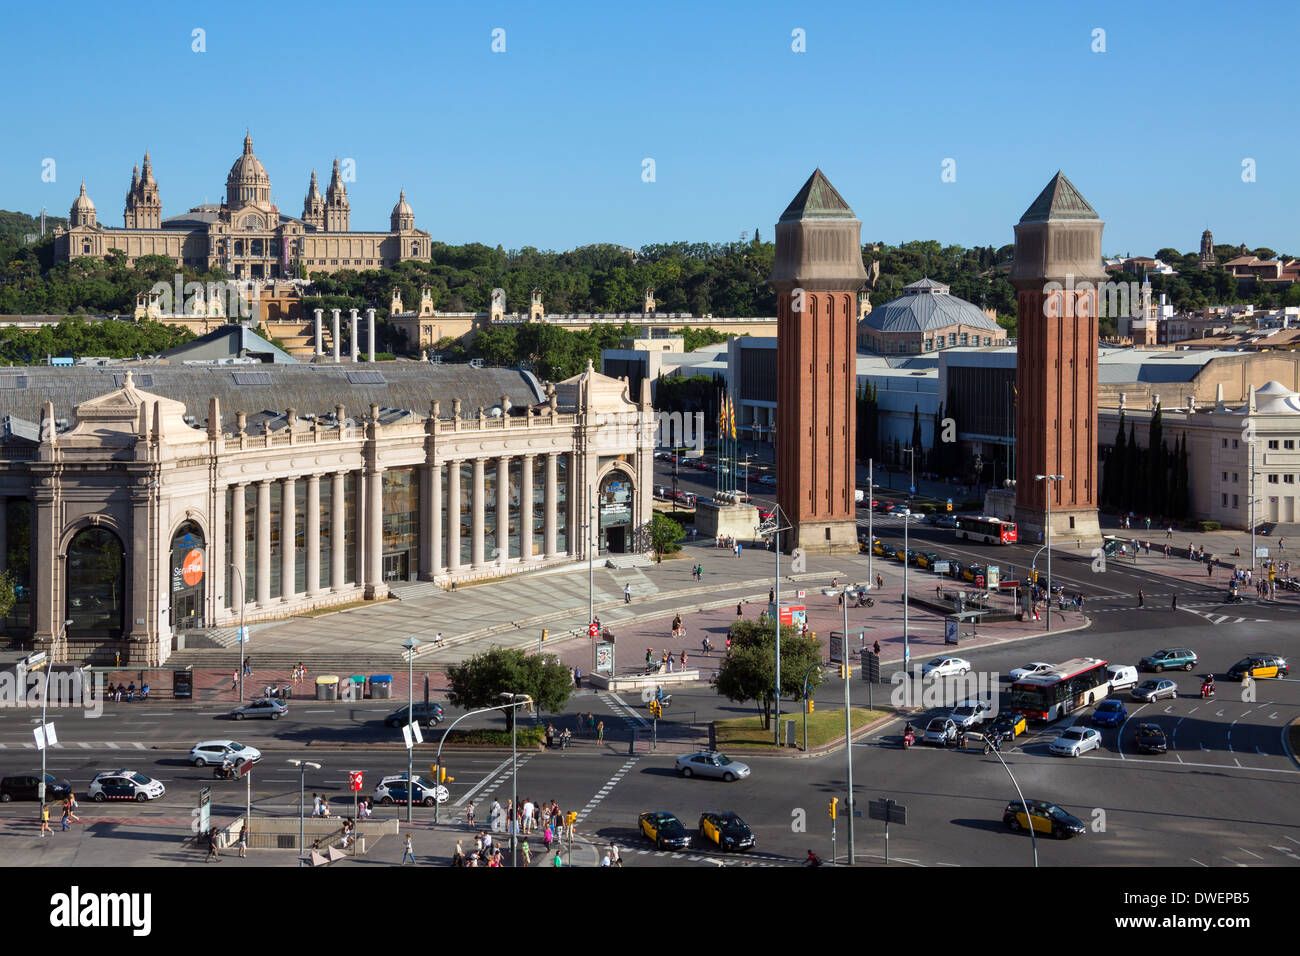 The National Palace - Montjuic district of Barcelona in the Catalonia region of Spain. Stock Photo